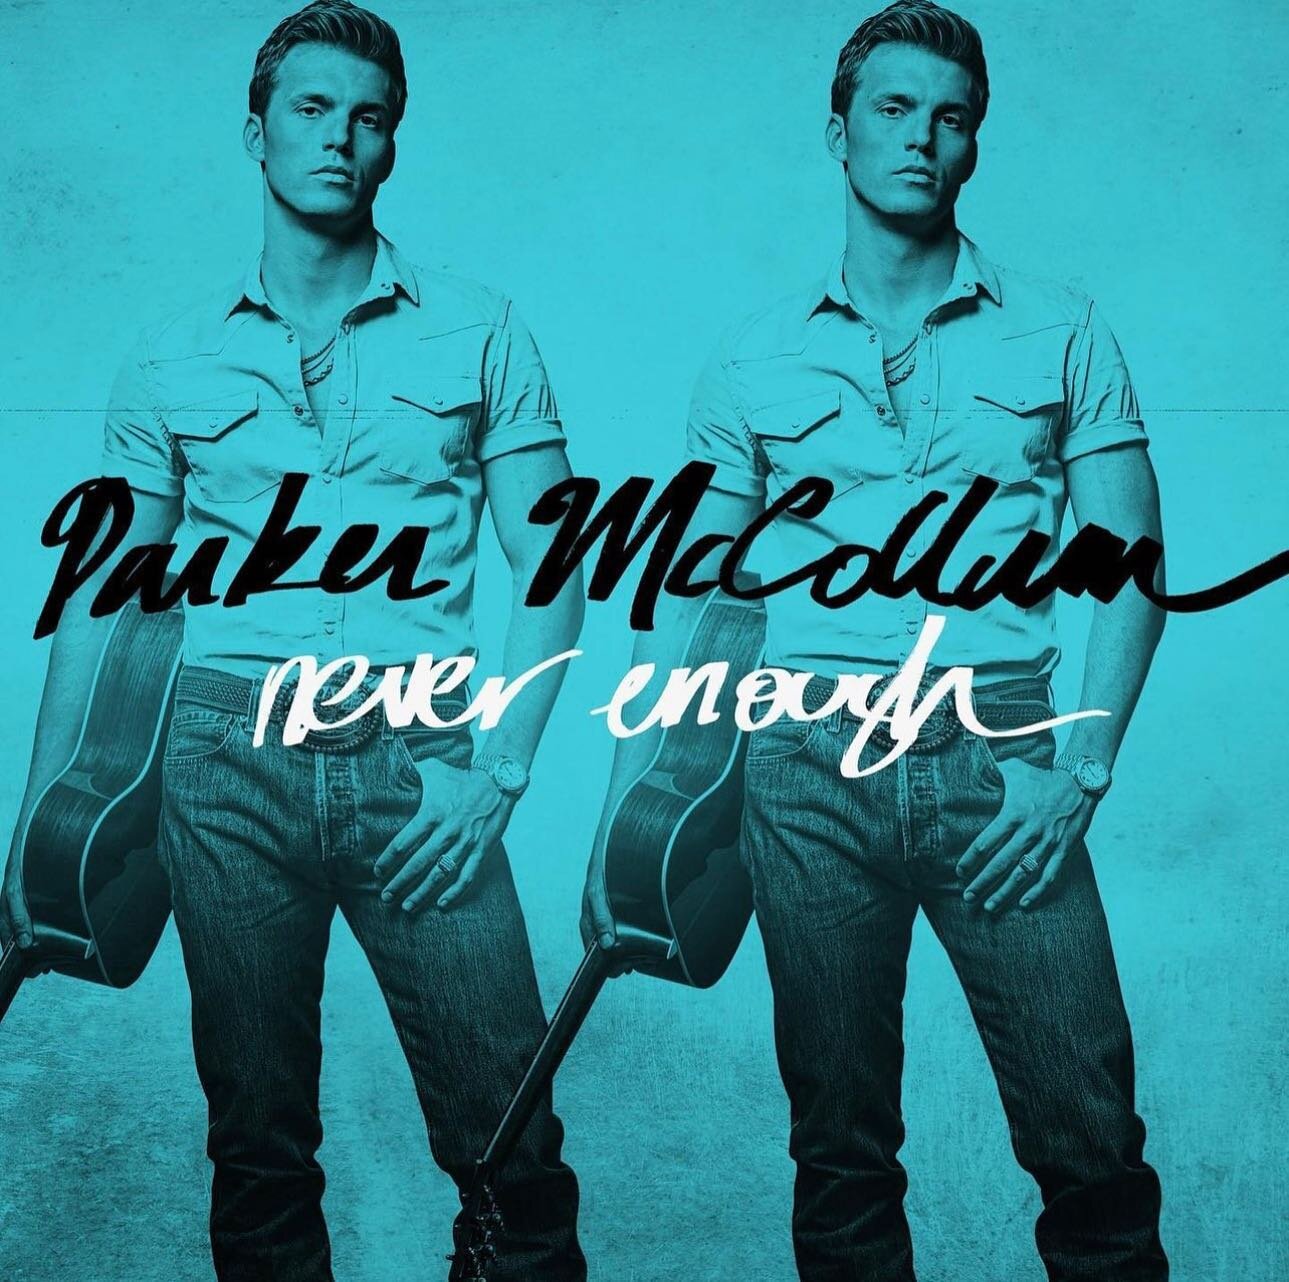 NEVER ENOUGH. The brand new album from country hitmaker @parkermccollum is out now. Mastered by @plyman. Co-mixed for ATMOS by @robotlemon &amp; @btowles3. 

#infrasonic #infrasonicsound #PeteLyman #FReidShippen #BrandonTowles #ATMOS #Sony360 #ATMOSm